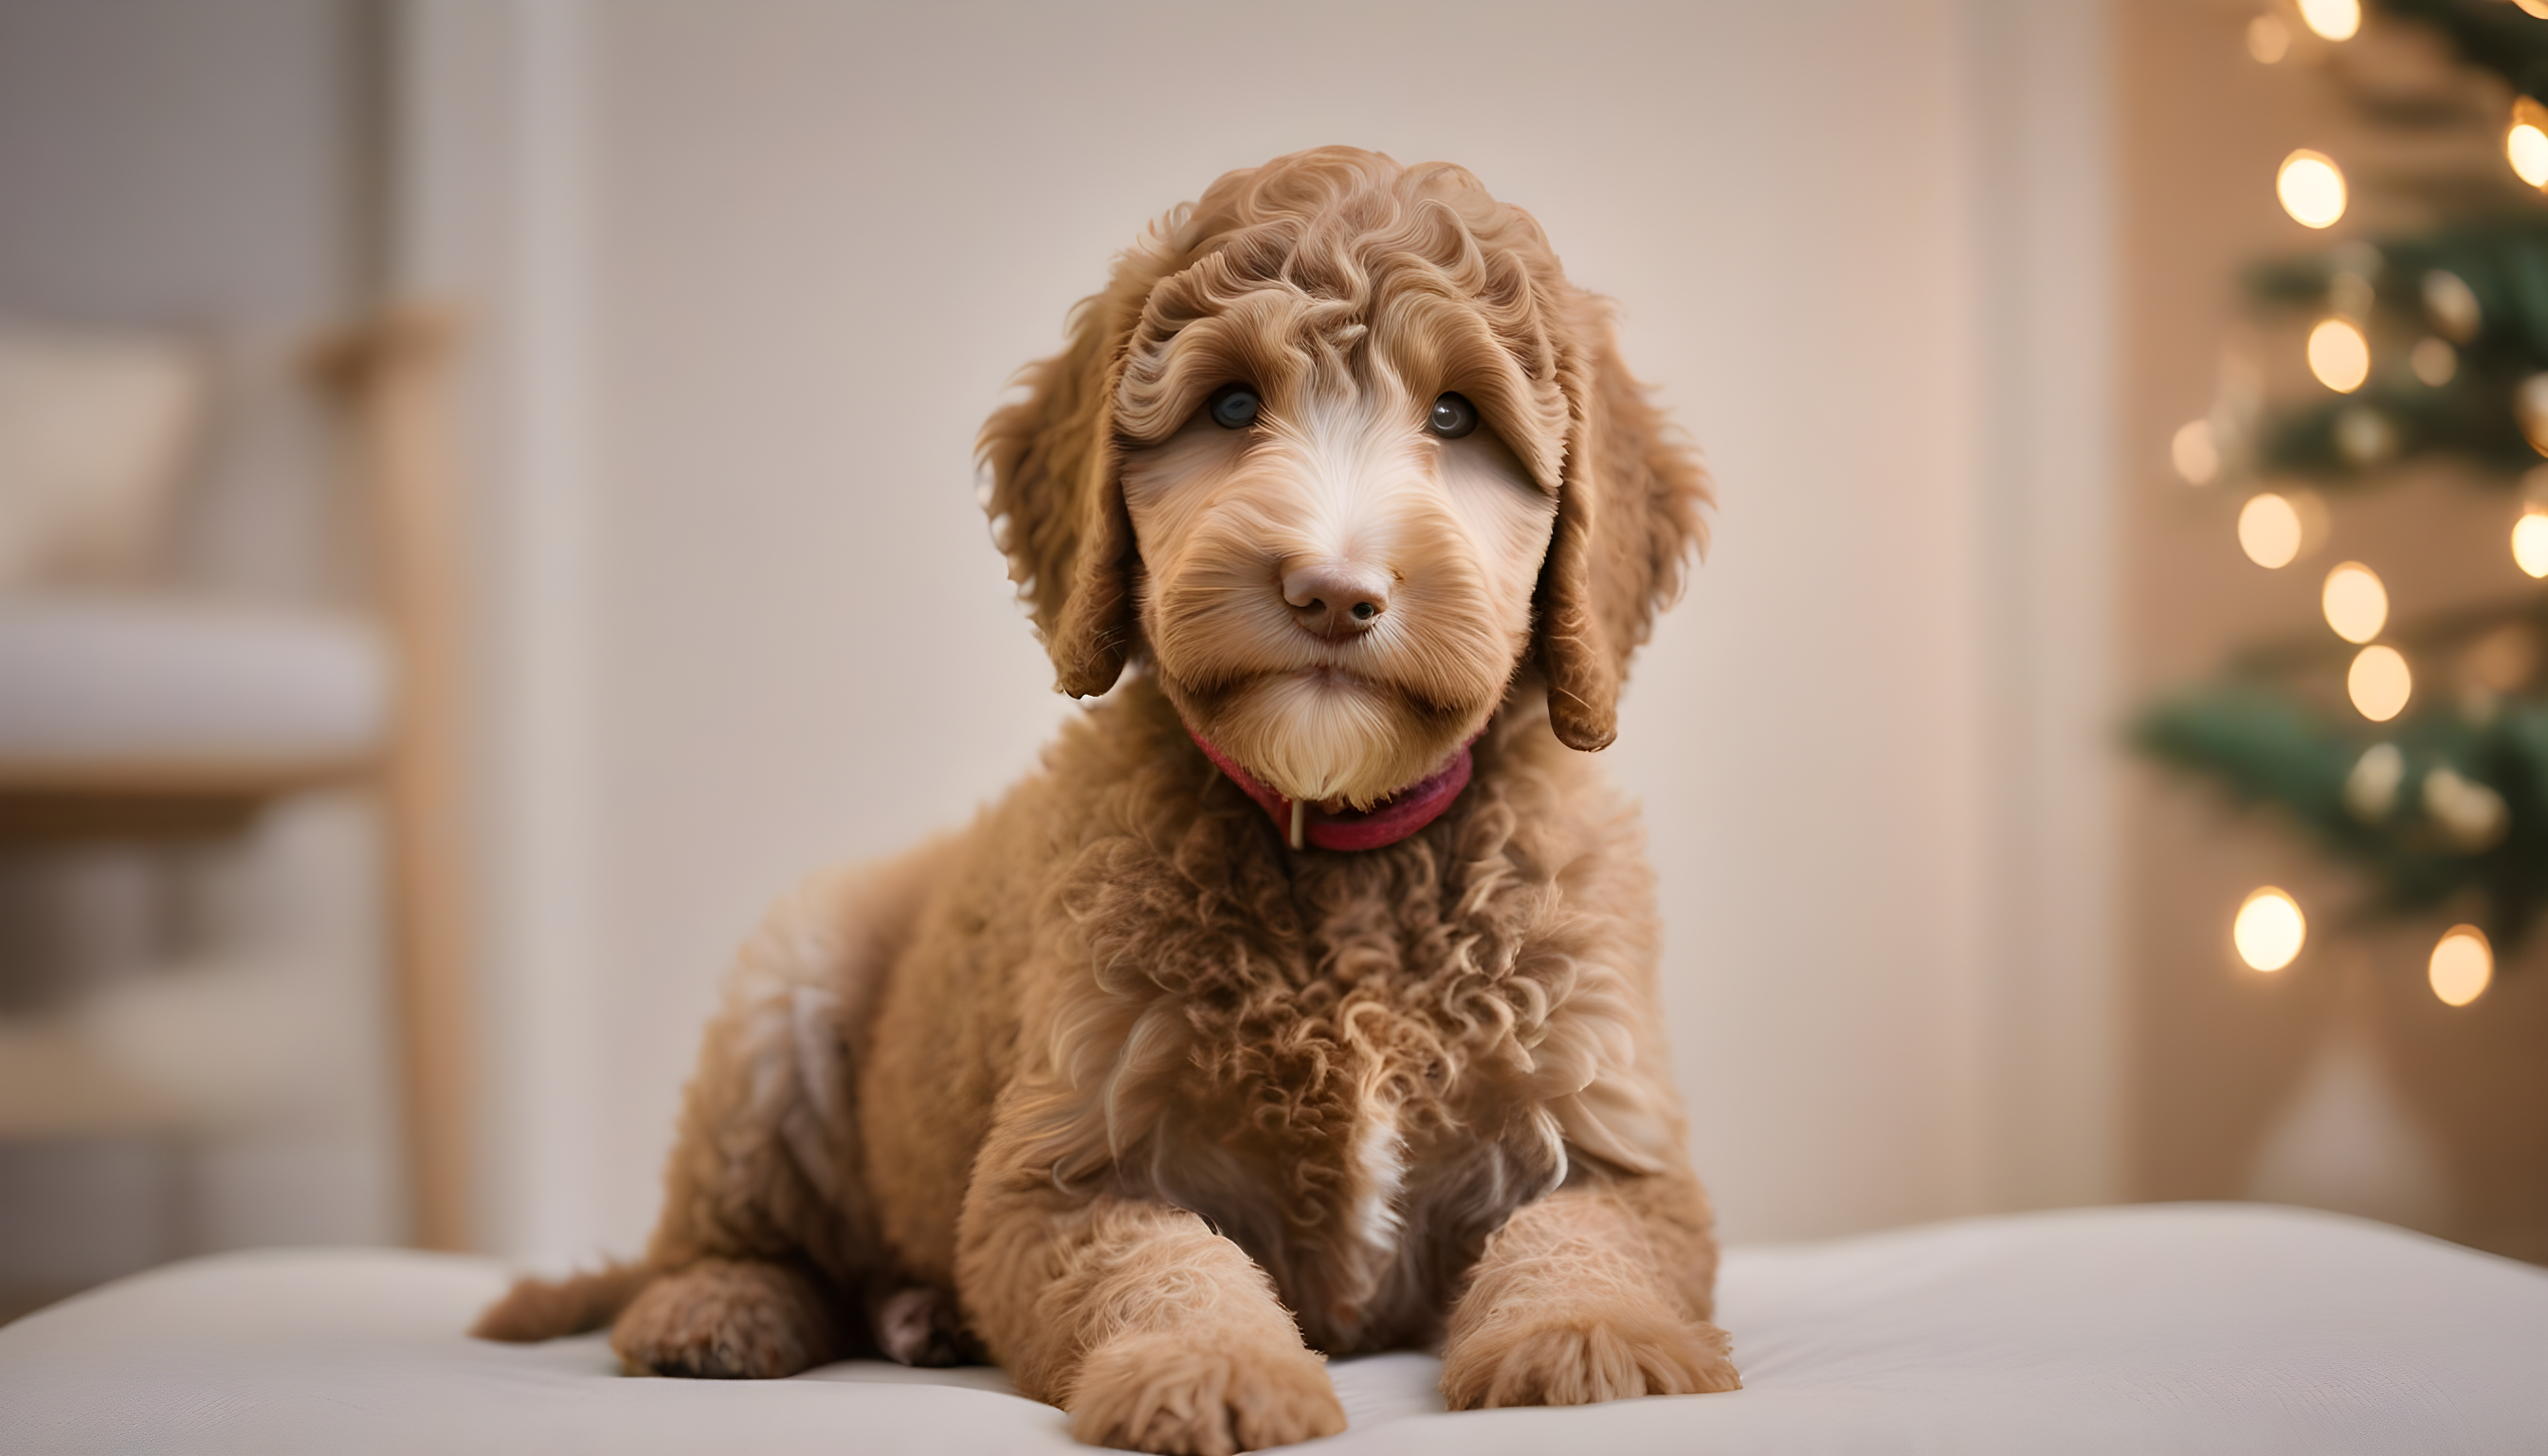 Affordable Labradoodle puppy with price tag